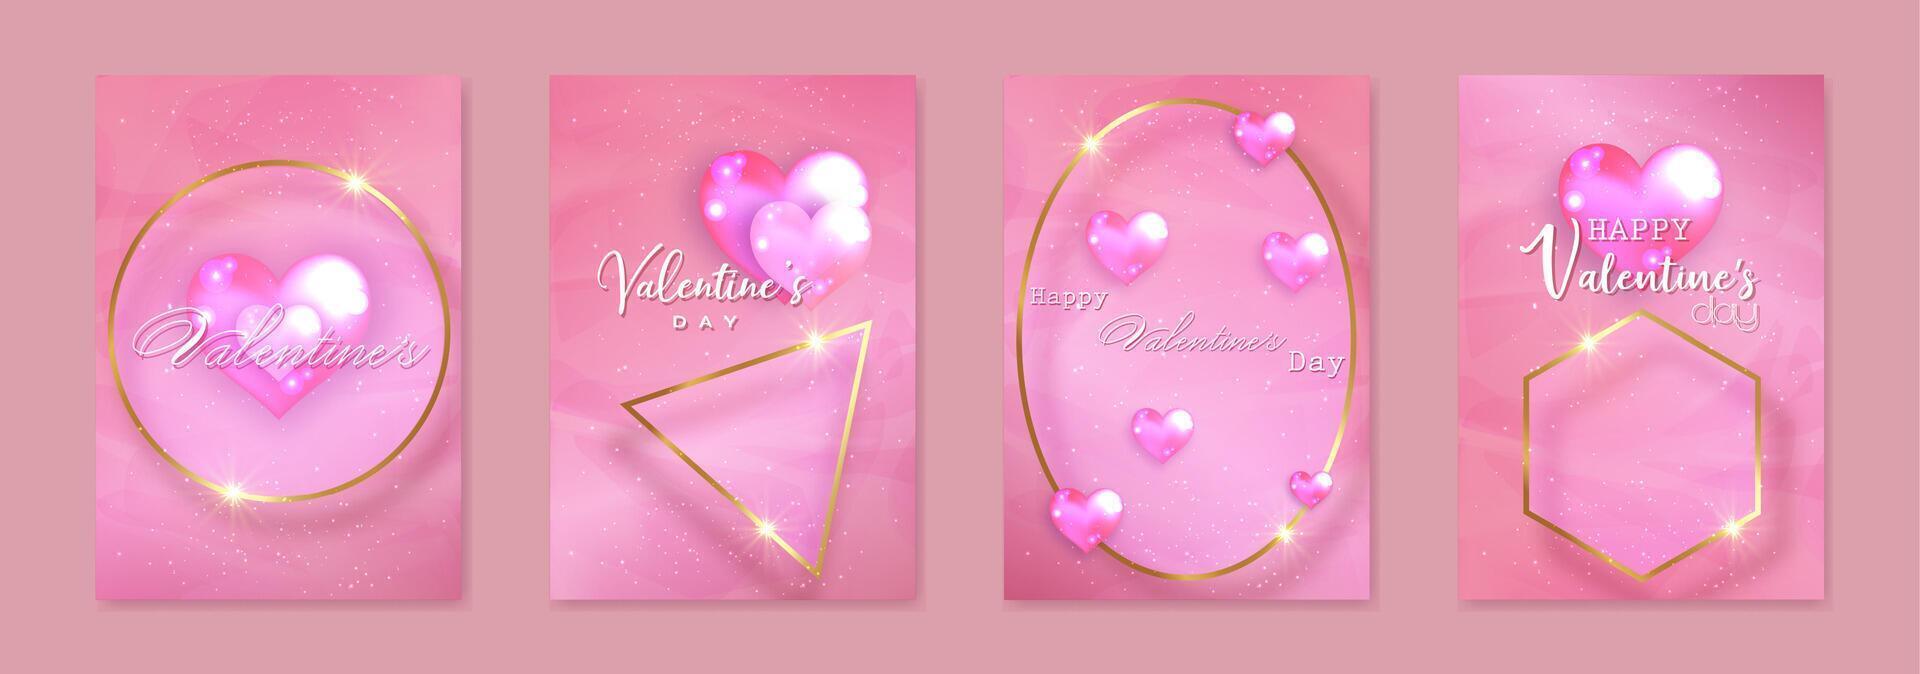 Happy Valentines day set card. 3D glossy pink glass hearts on luxury glittering paper background. Holiday poster with gold geometric frames, jewels. Concept for banner, flyer, party invitation, gift vector